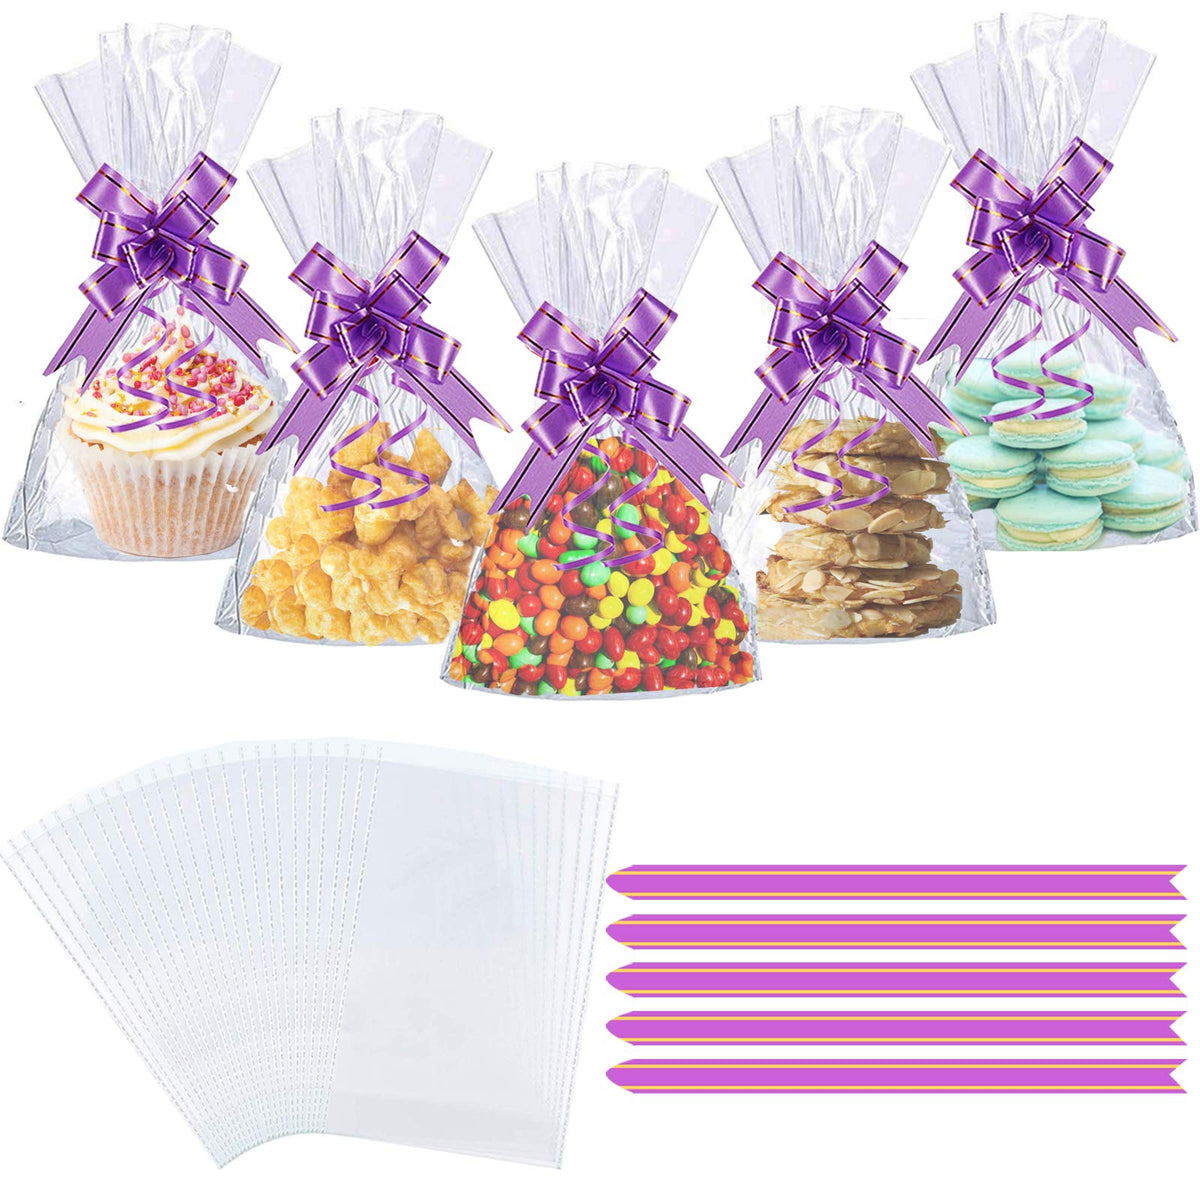 50PCS Clear Cellophane Treat Bags, AUERVO 13 x 18 cm Clear Resealable Flat Cello Bags Sweet Party Gift Bags Candy/Cookie/Chokley/with 50PCS Purple Pull Bows